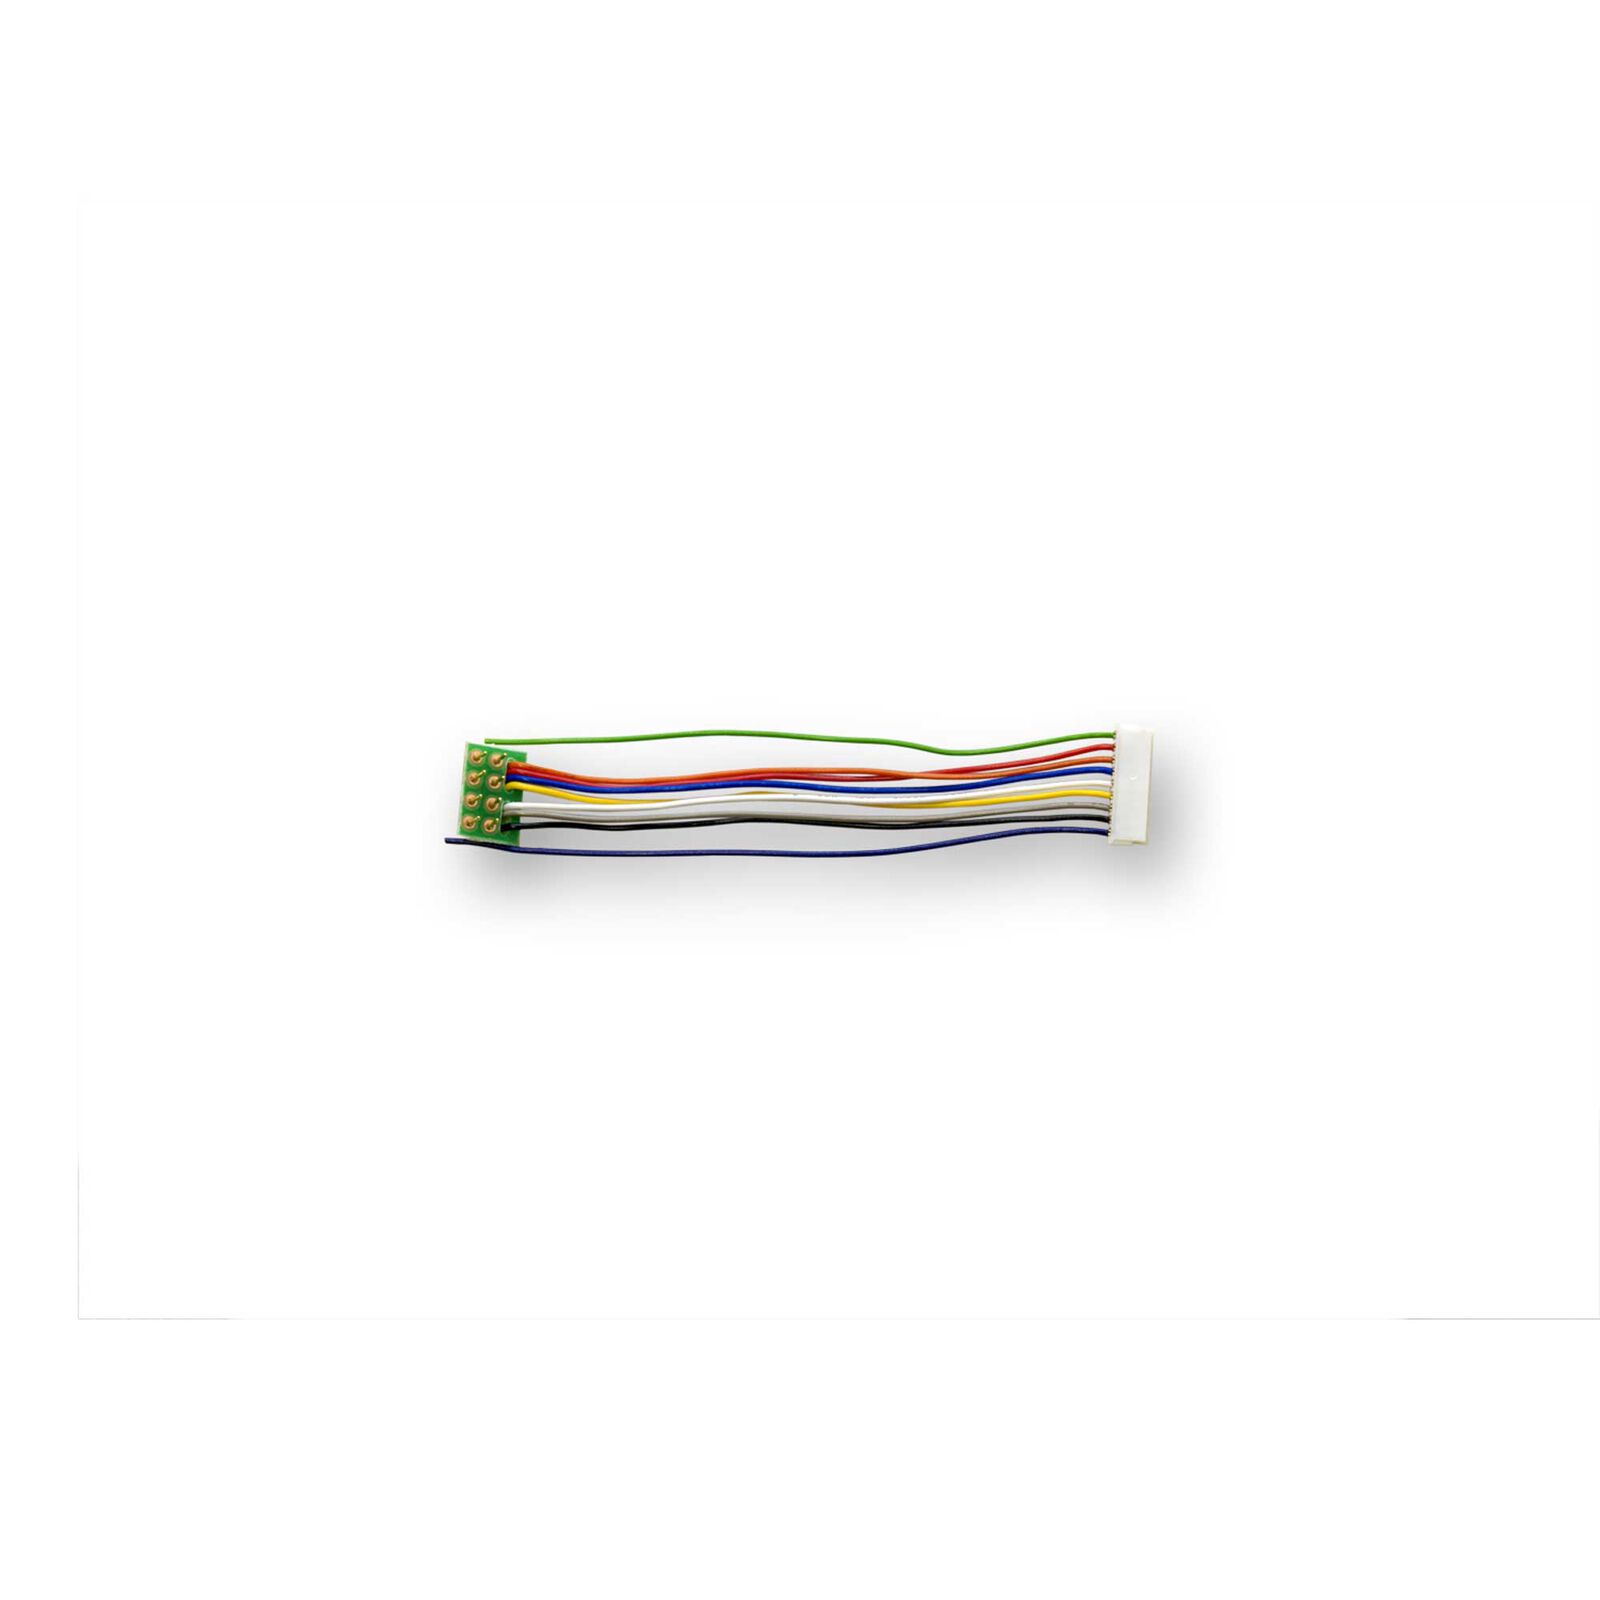 HO DCC Decoder Wire Harness, 3.2" 8-Pin